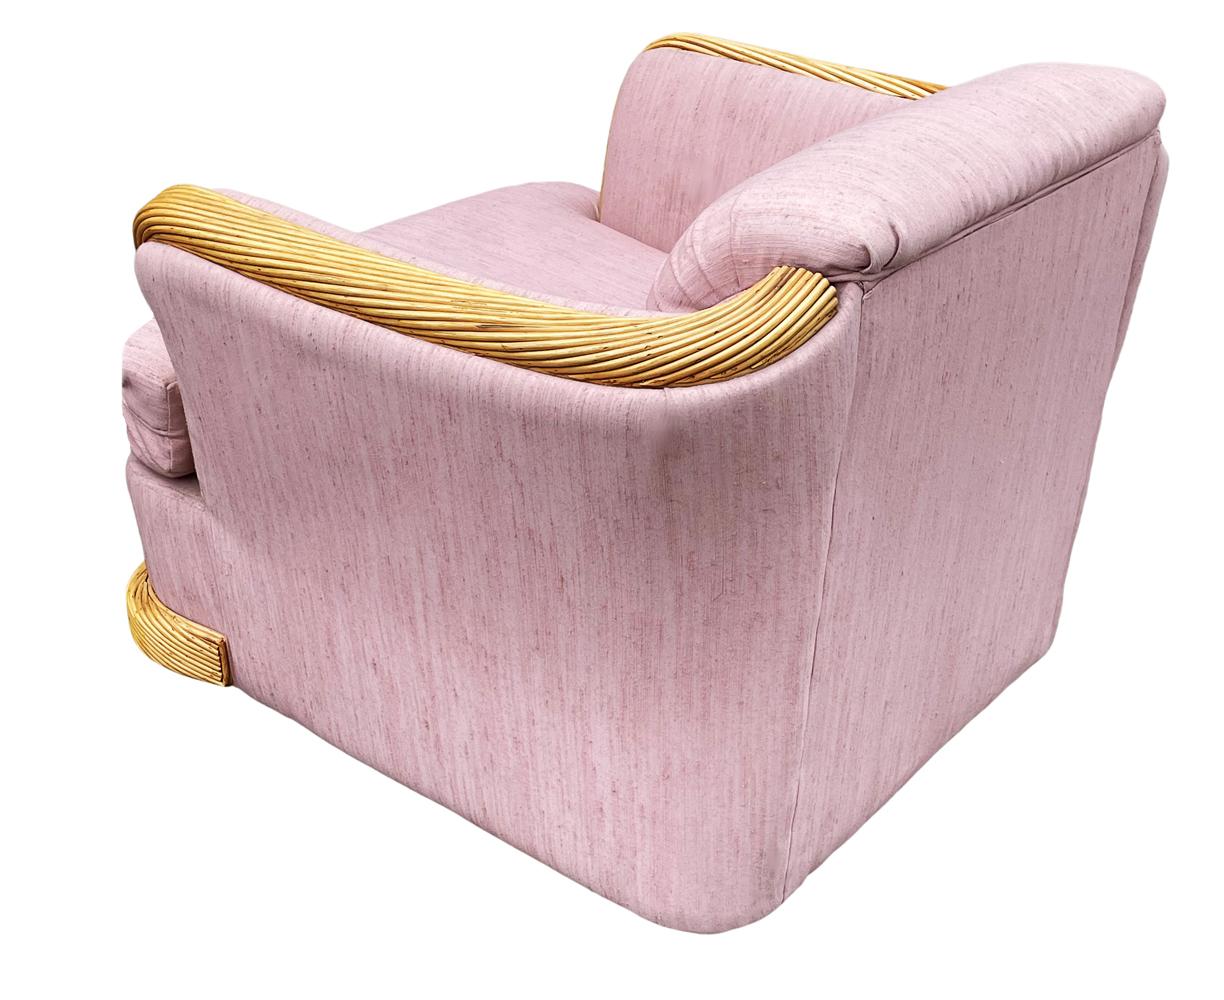 Midcentury Coastal Modern Rattan Club or Lounge Chair with Pink Fabric For Sale 1